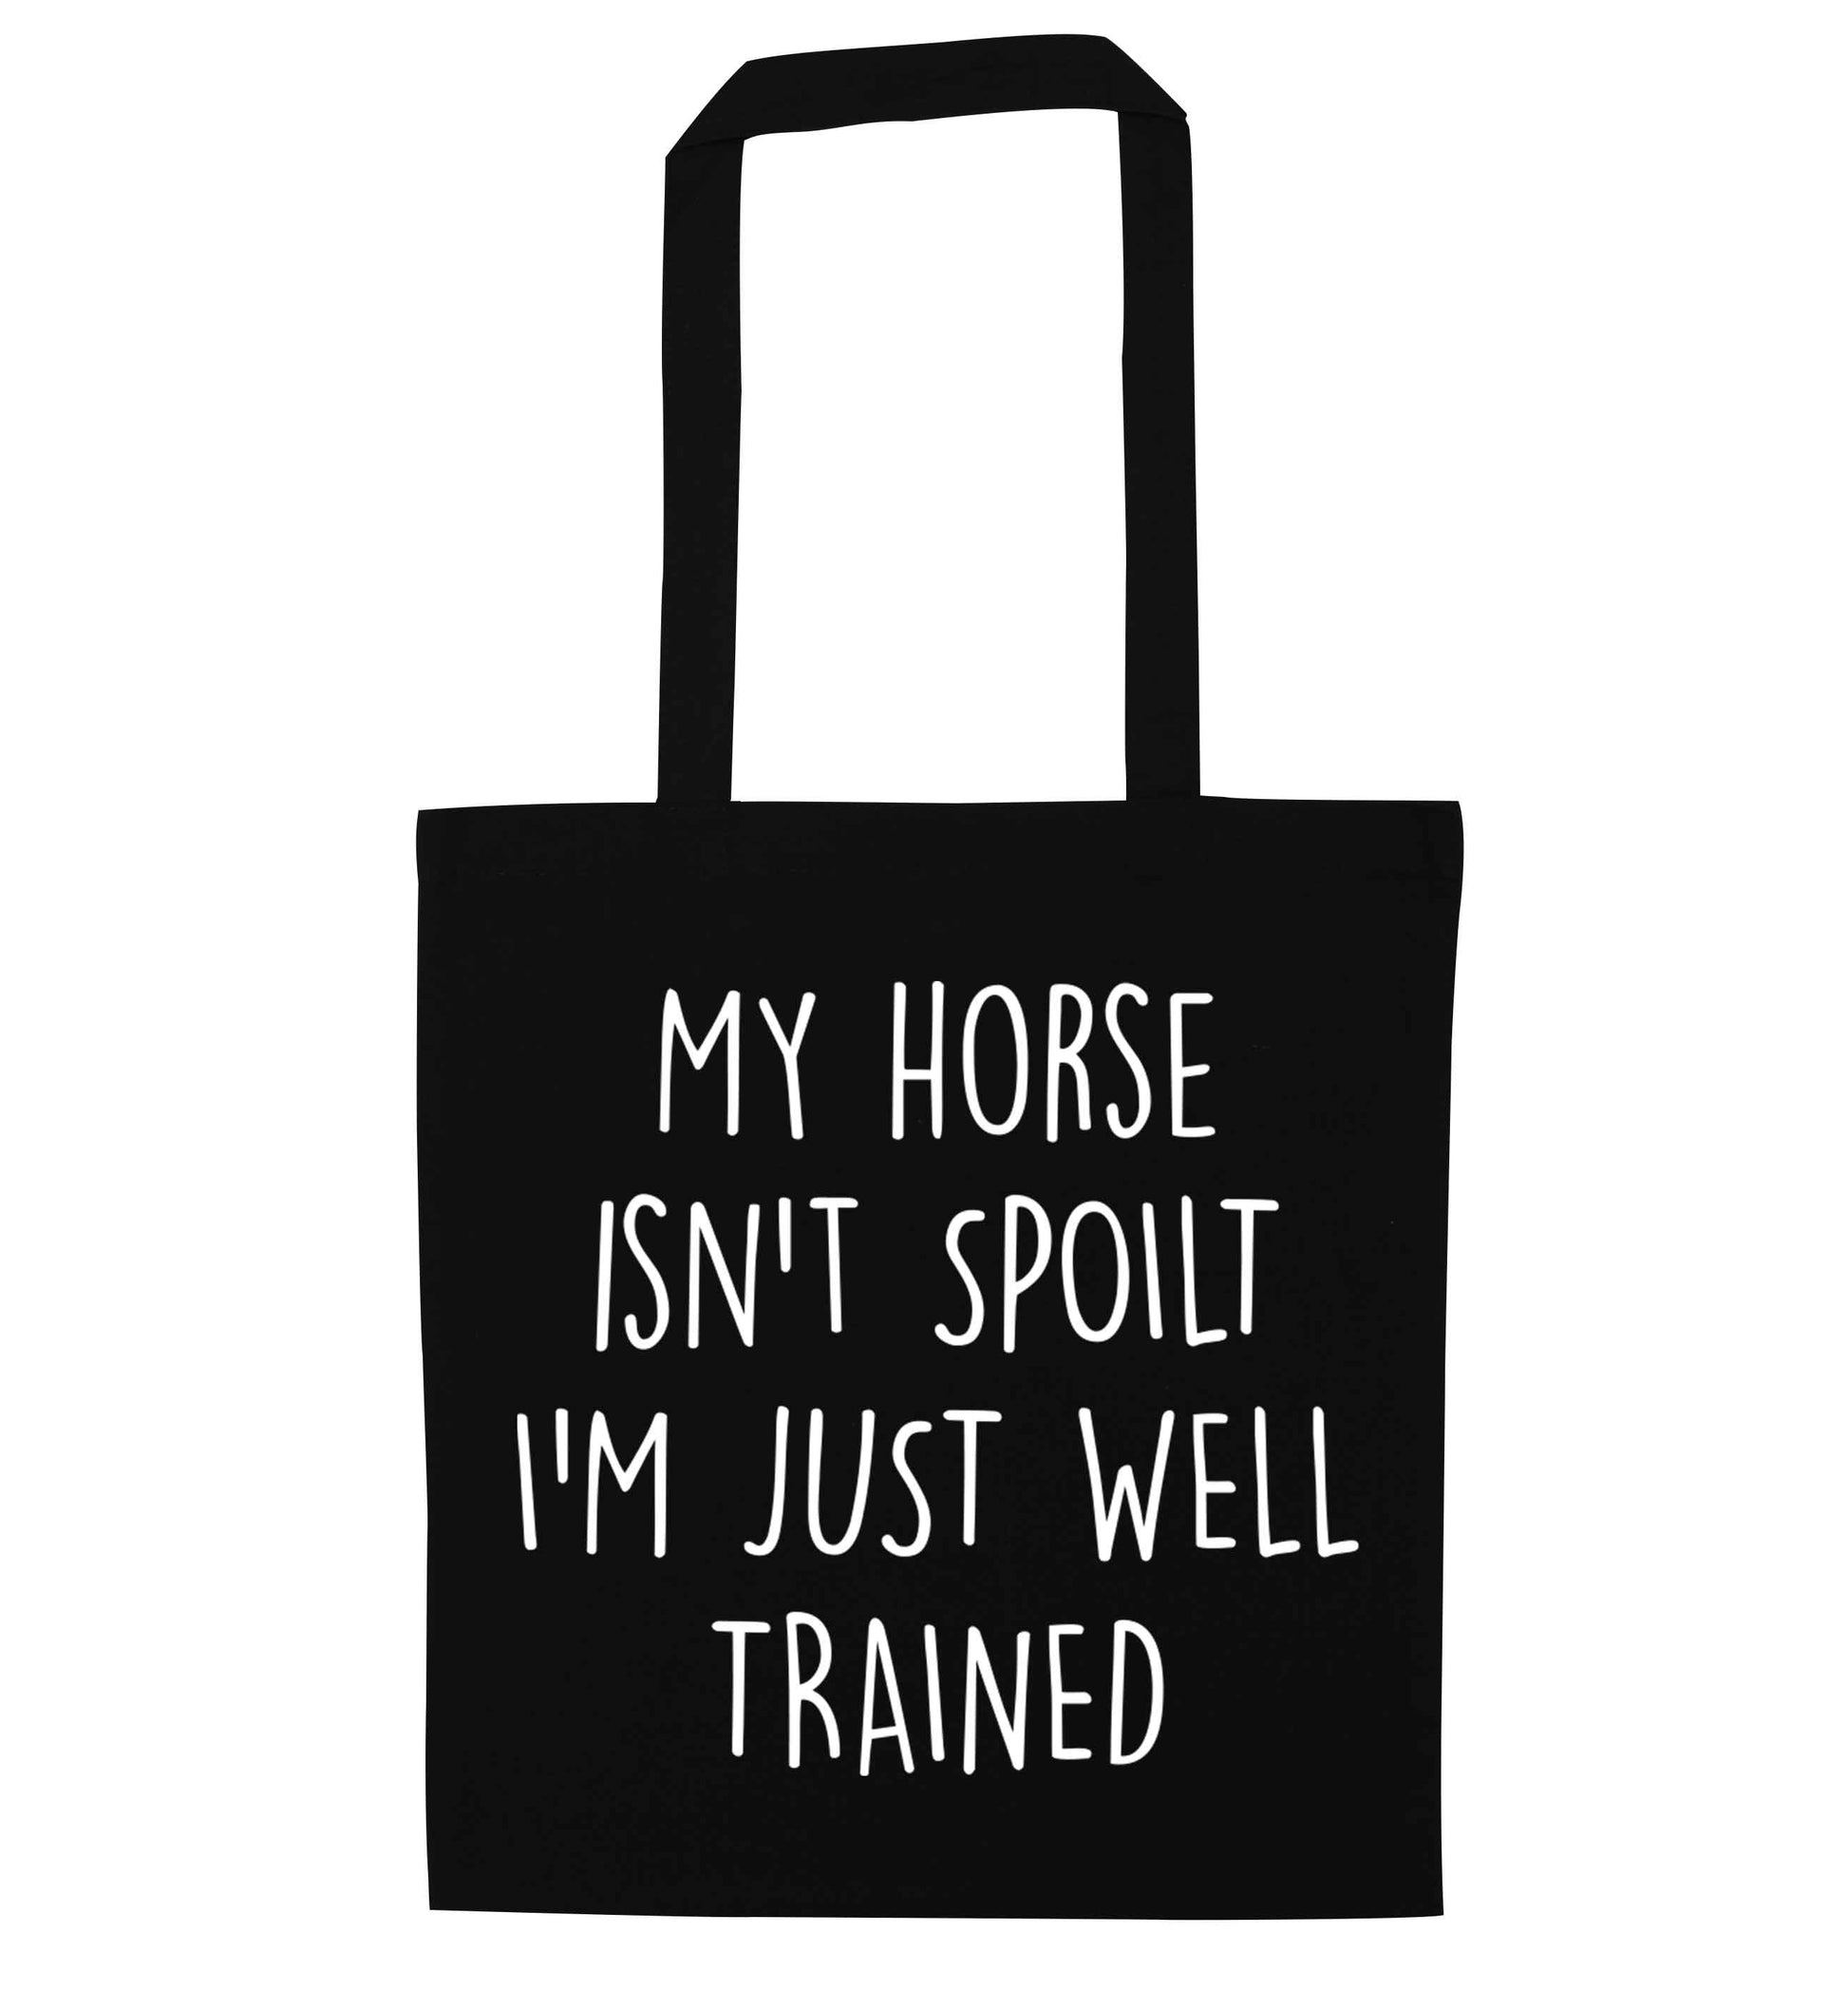 My horse isn't spoilt I'm just well trained black tote bag